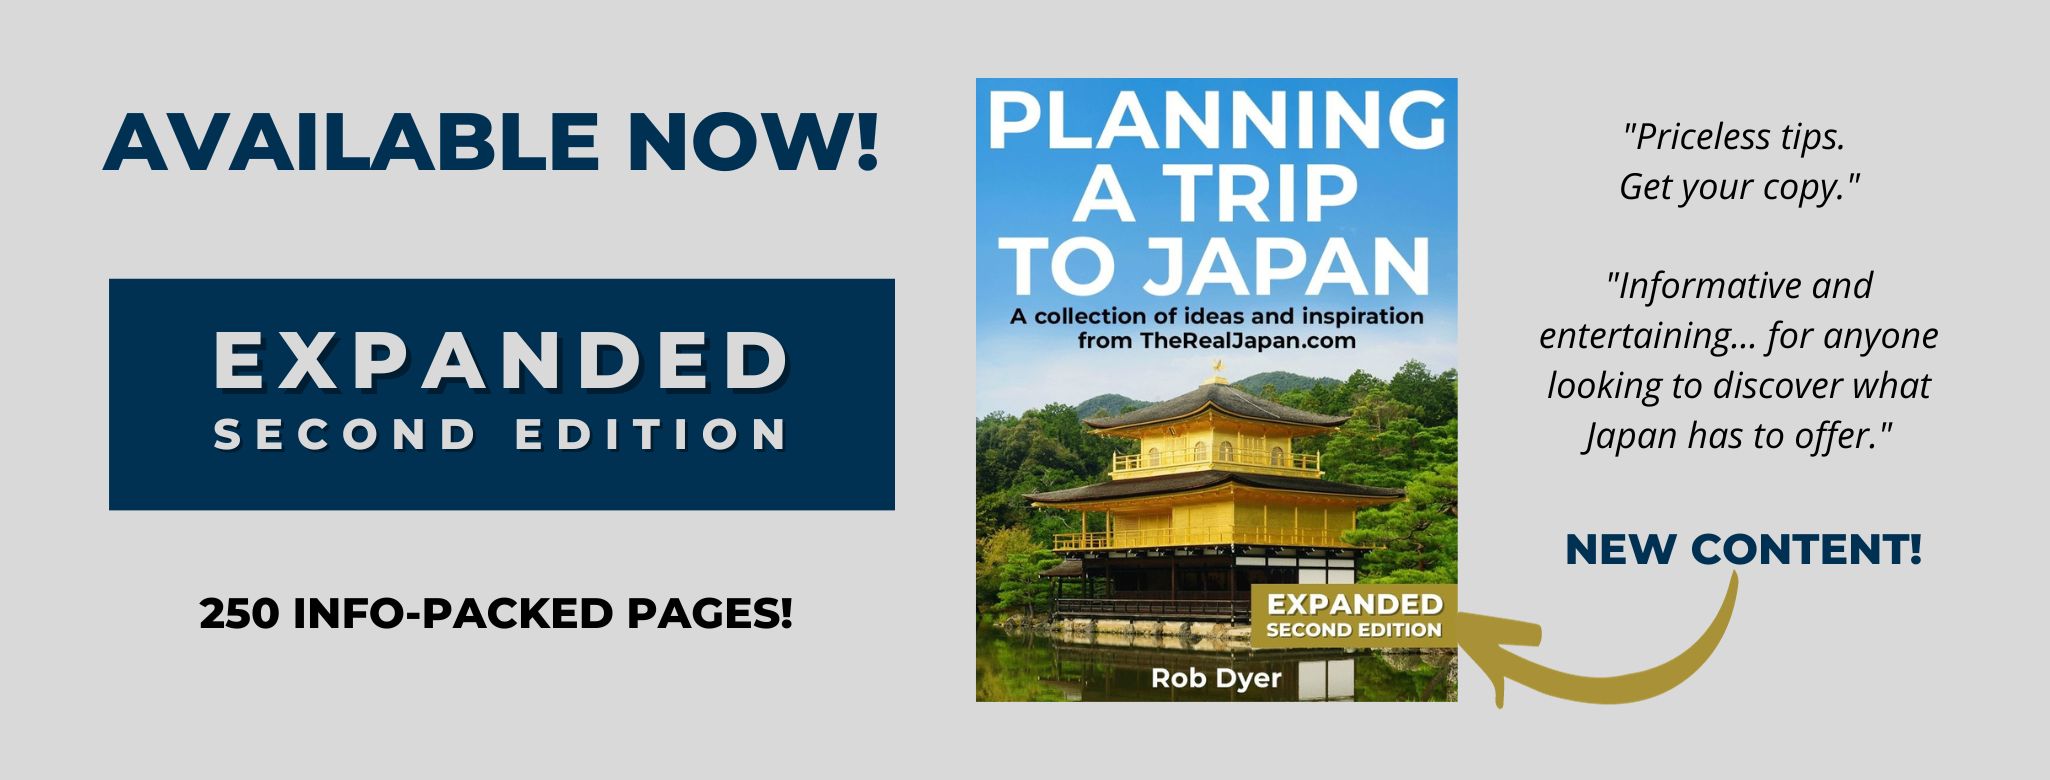 Planning ebook 2nd Edition banner The Real Japan Rob Dyer